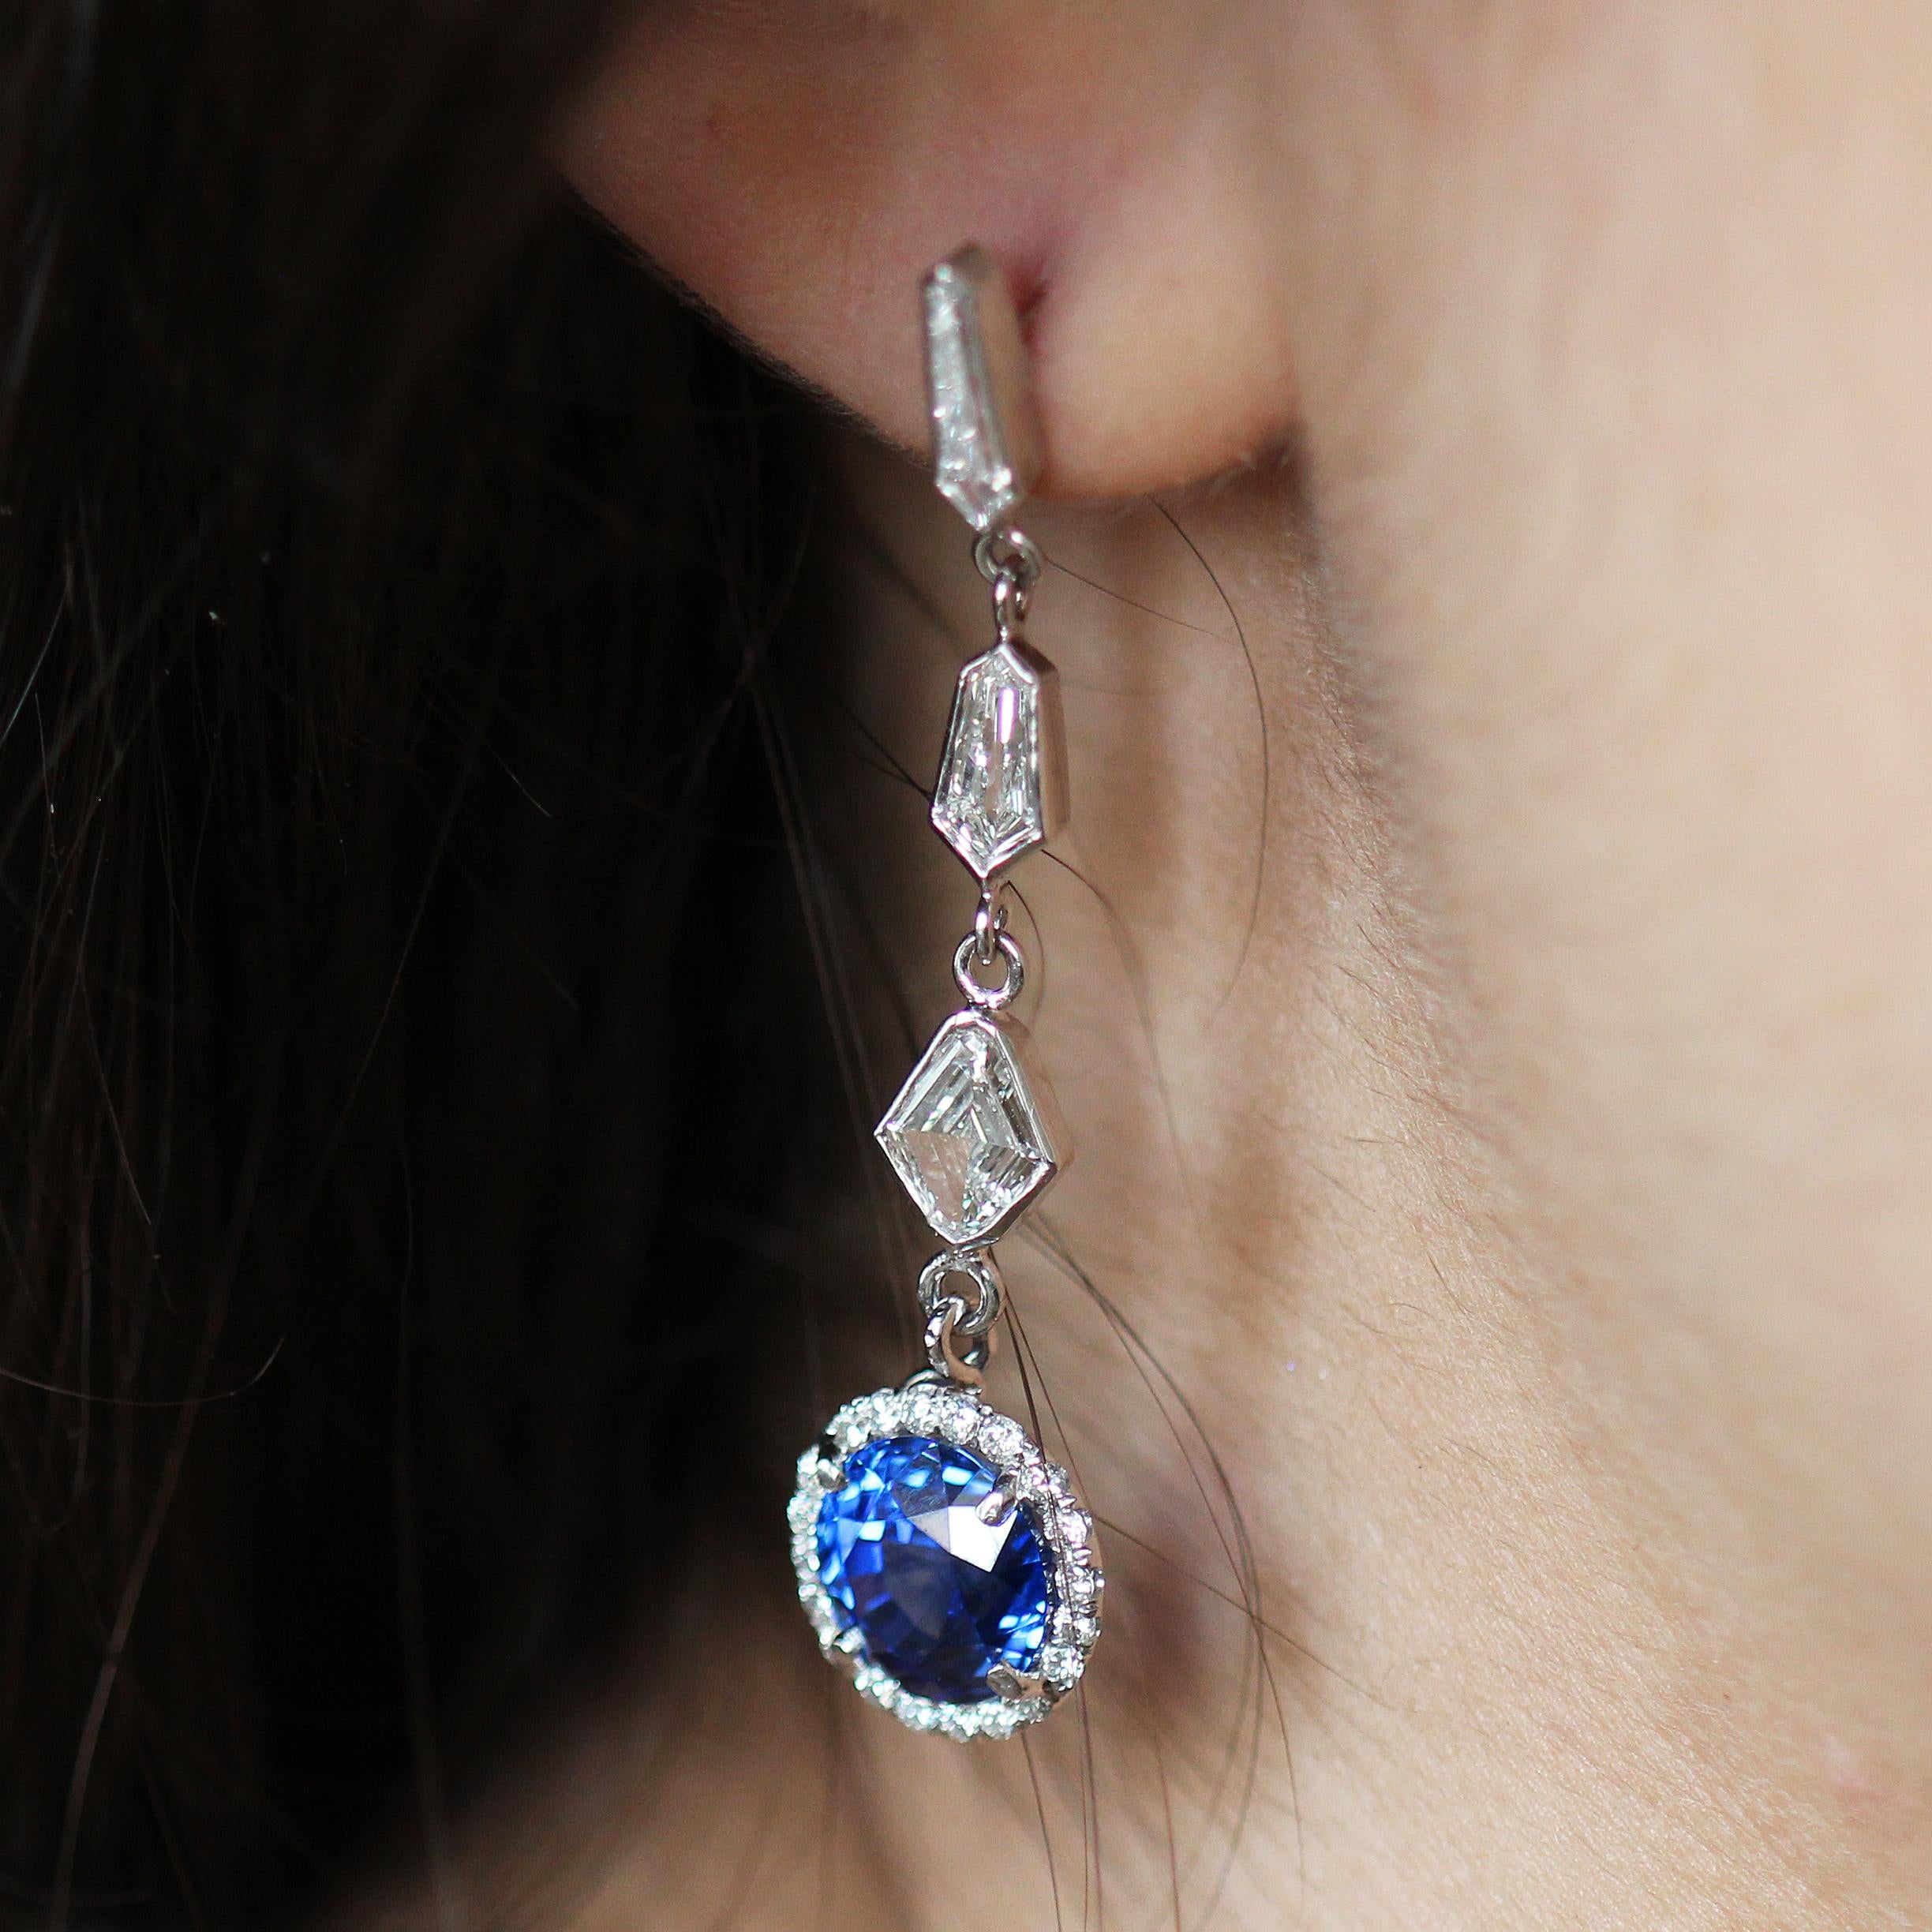 Presenting a magnificent pair of vivid electric blue 100% natural with no treatments certified sapphires, set in platinum and diamond drop earrings.
Looking thought 1000's of sapphires these are in the top 1% quality and beauty wise of stones we